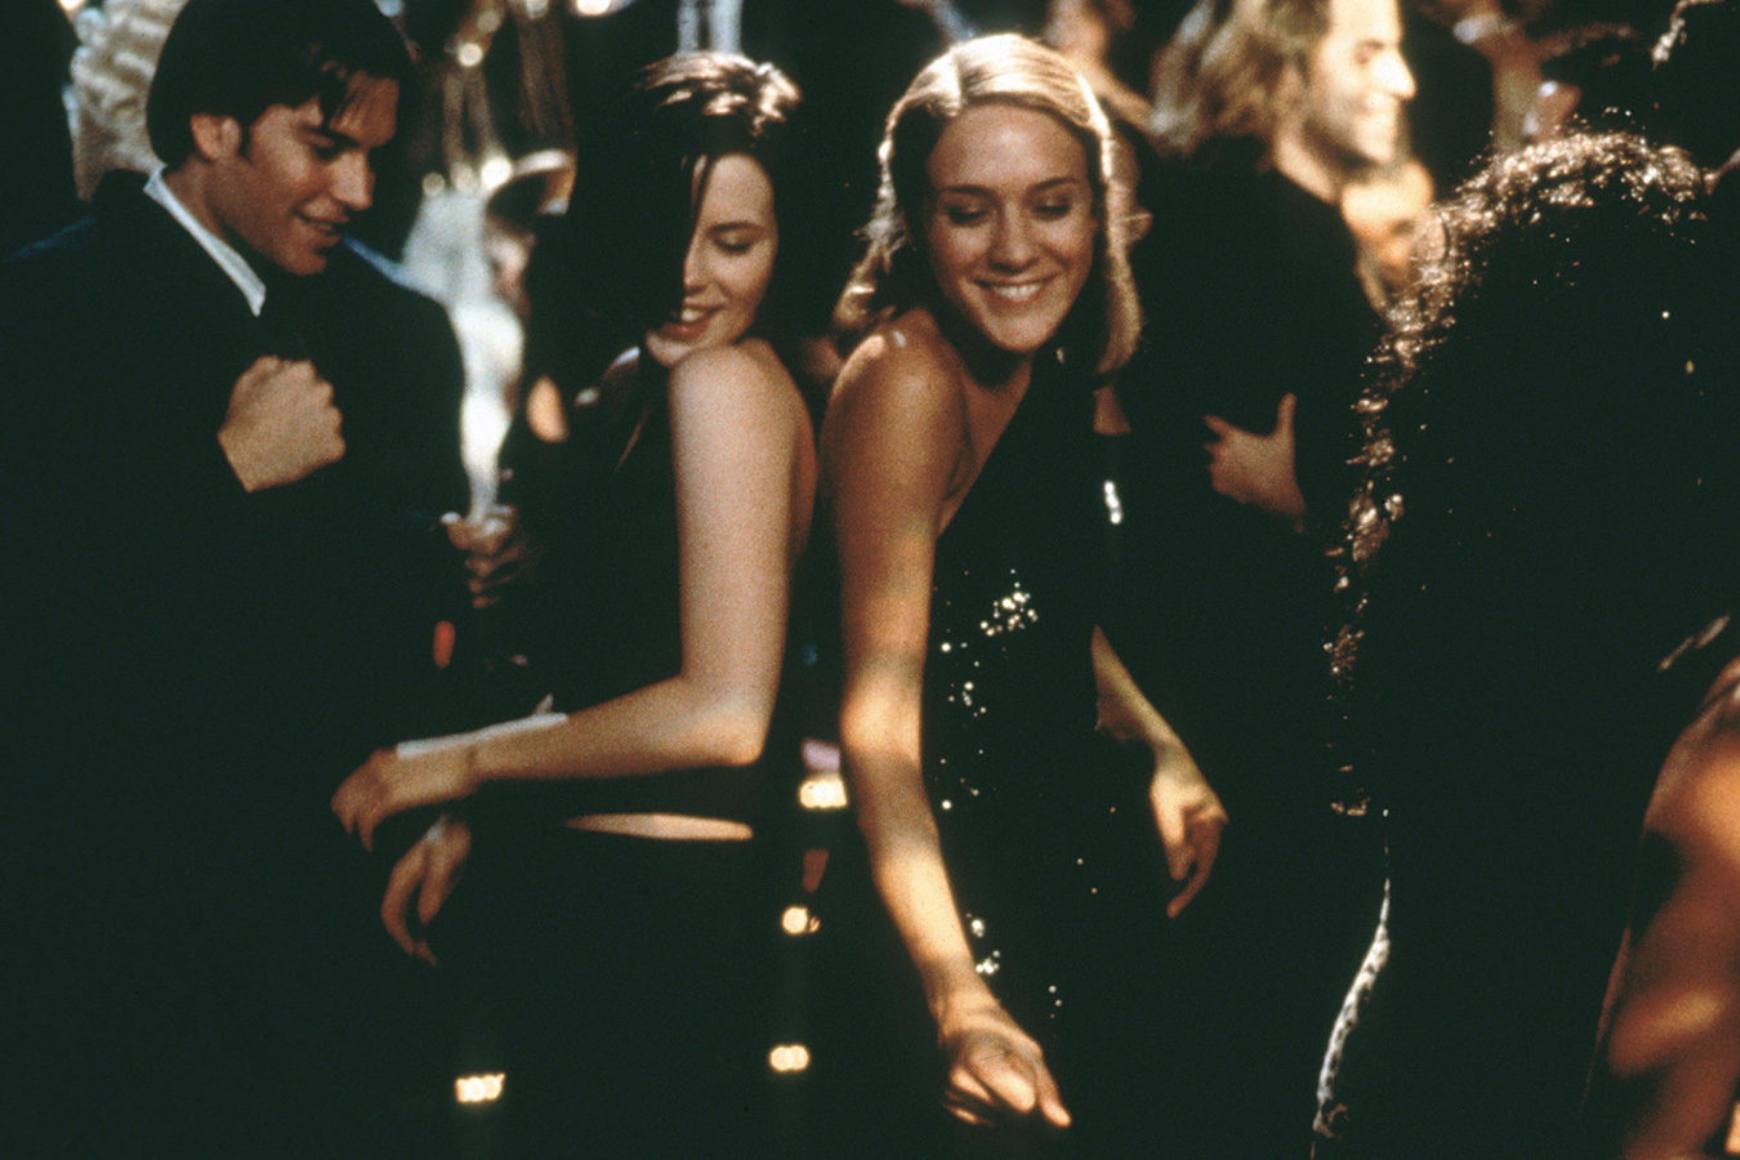 Kate Beckinsale and Chloë Sevigny smile and dance in black dresses in a crowded room. 